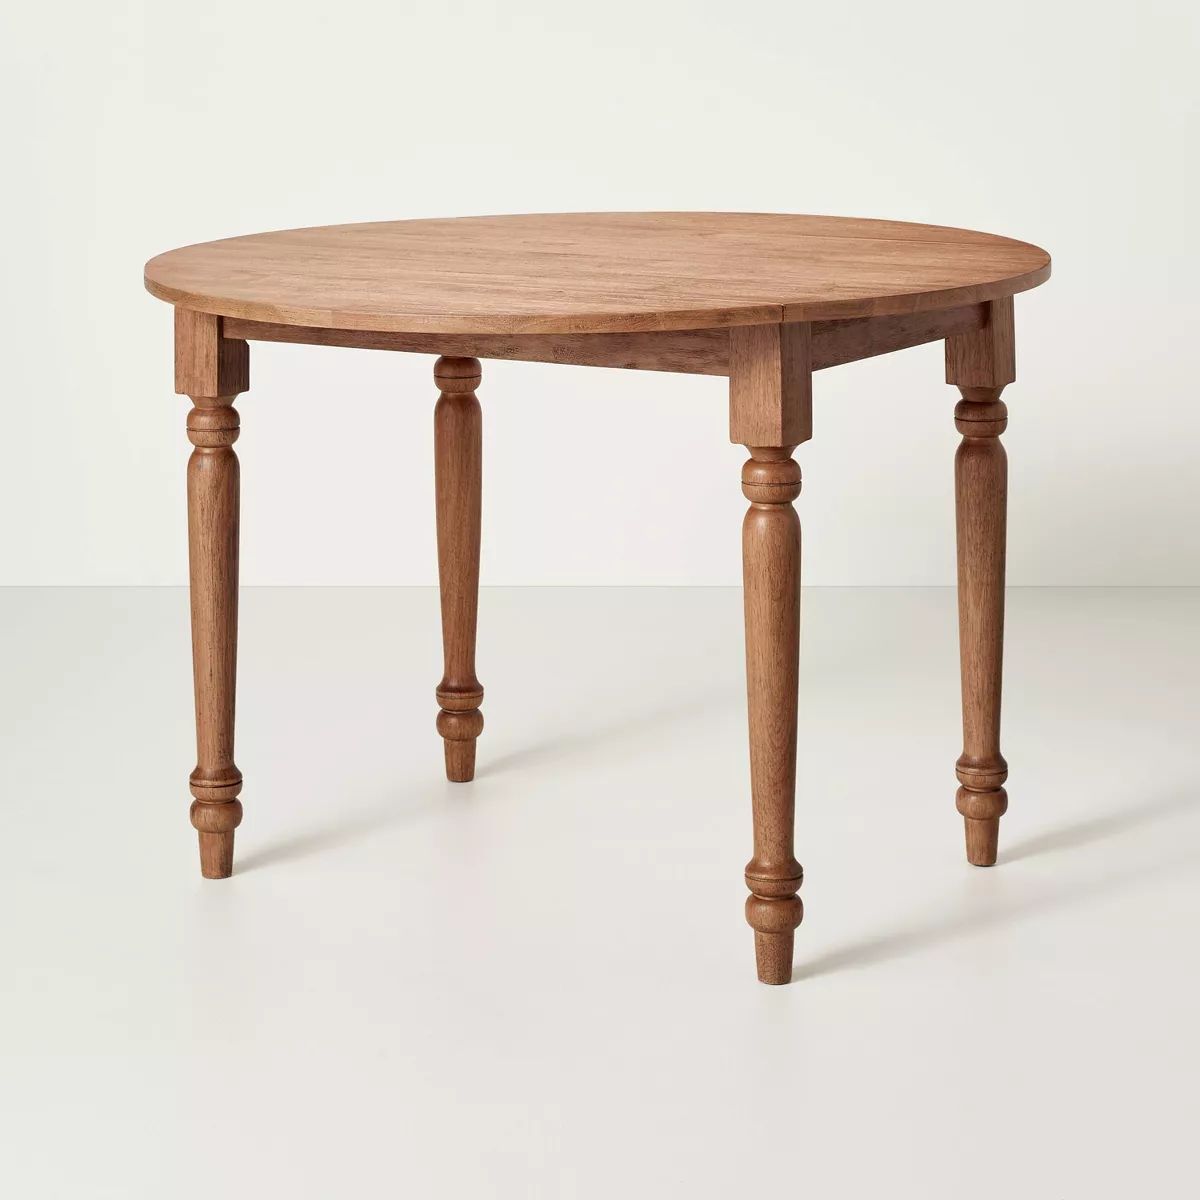 44" Vintage Windsor Drop Leaf Round Dining Table - Aged Oak - Hearth & Hand™ with Magnolia | Target